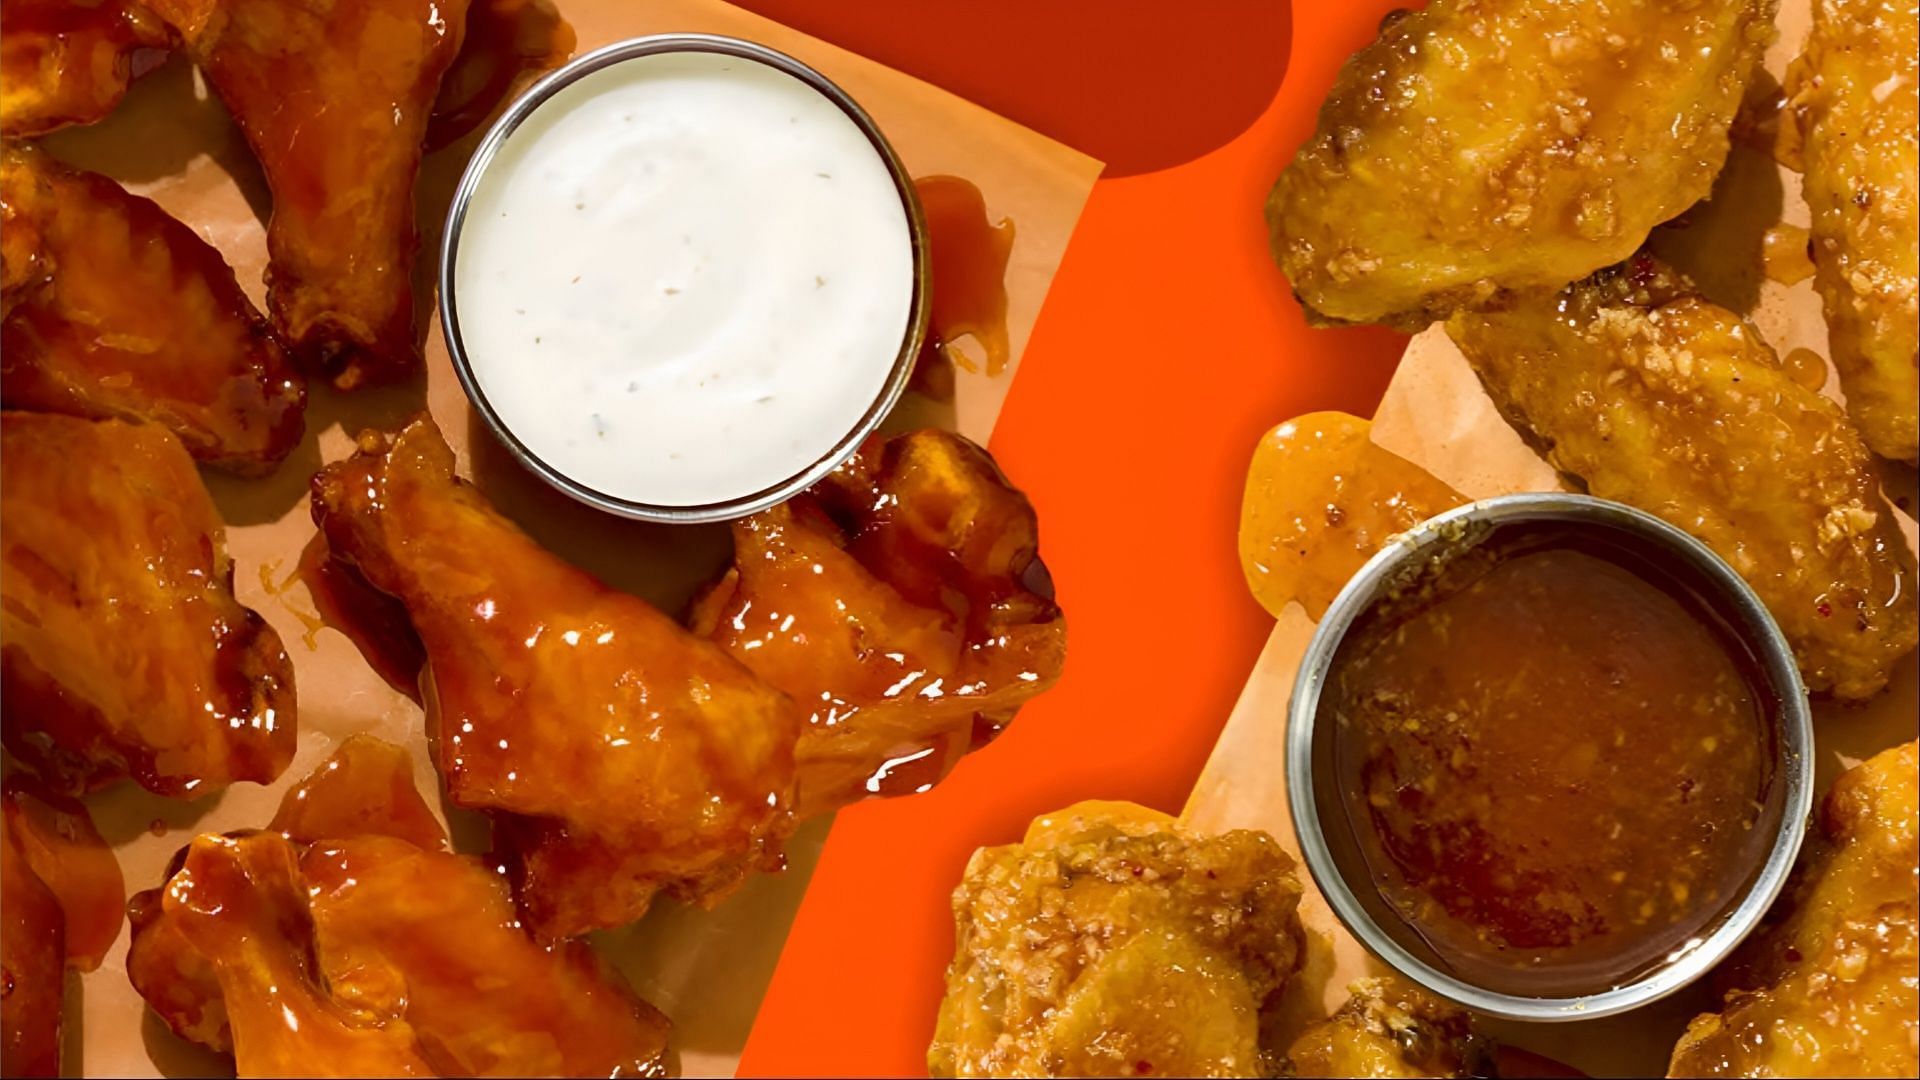 The Honey Sriracha and Honey Garlic sauces start at over $0.60 when ordered on their own (Image via Buffalo Wild Wings / Inspire Brands)